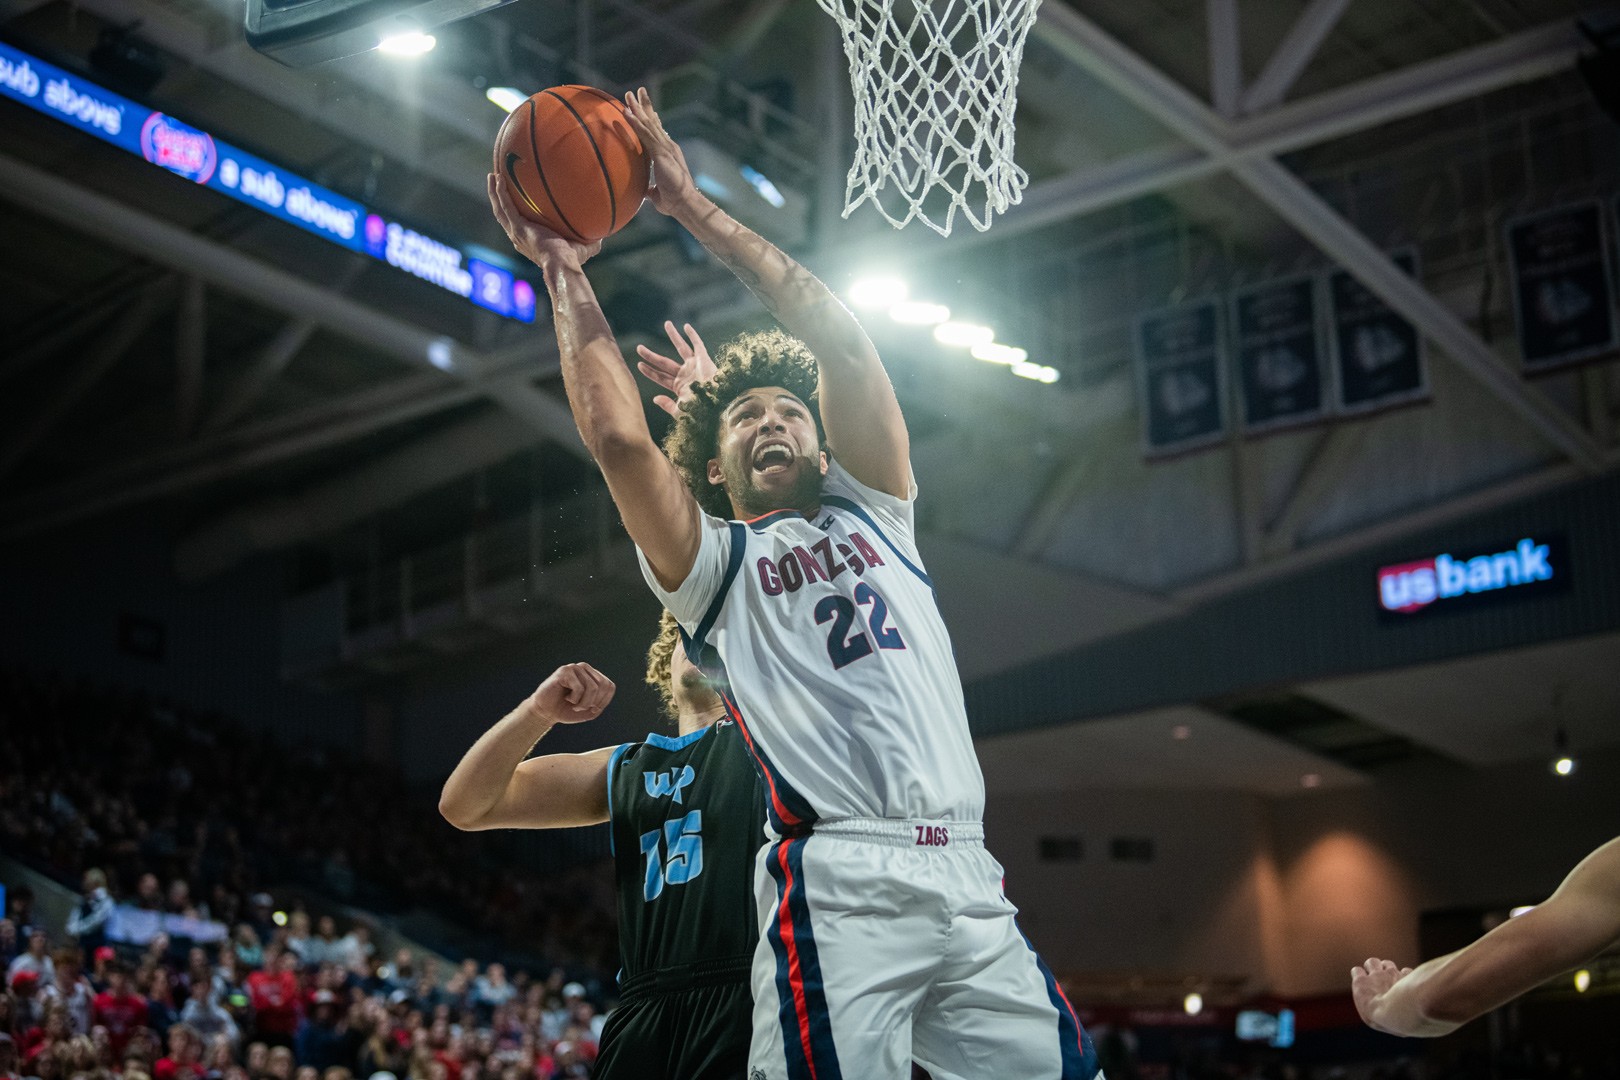 Best photos from Gonzaga's season-opening win over North Florida